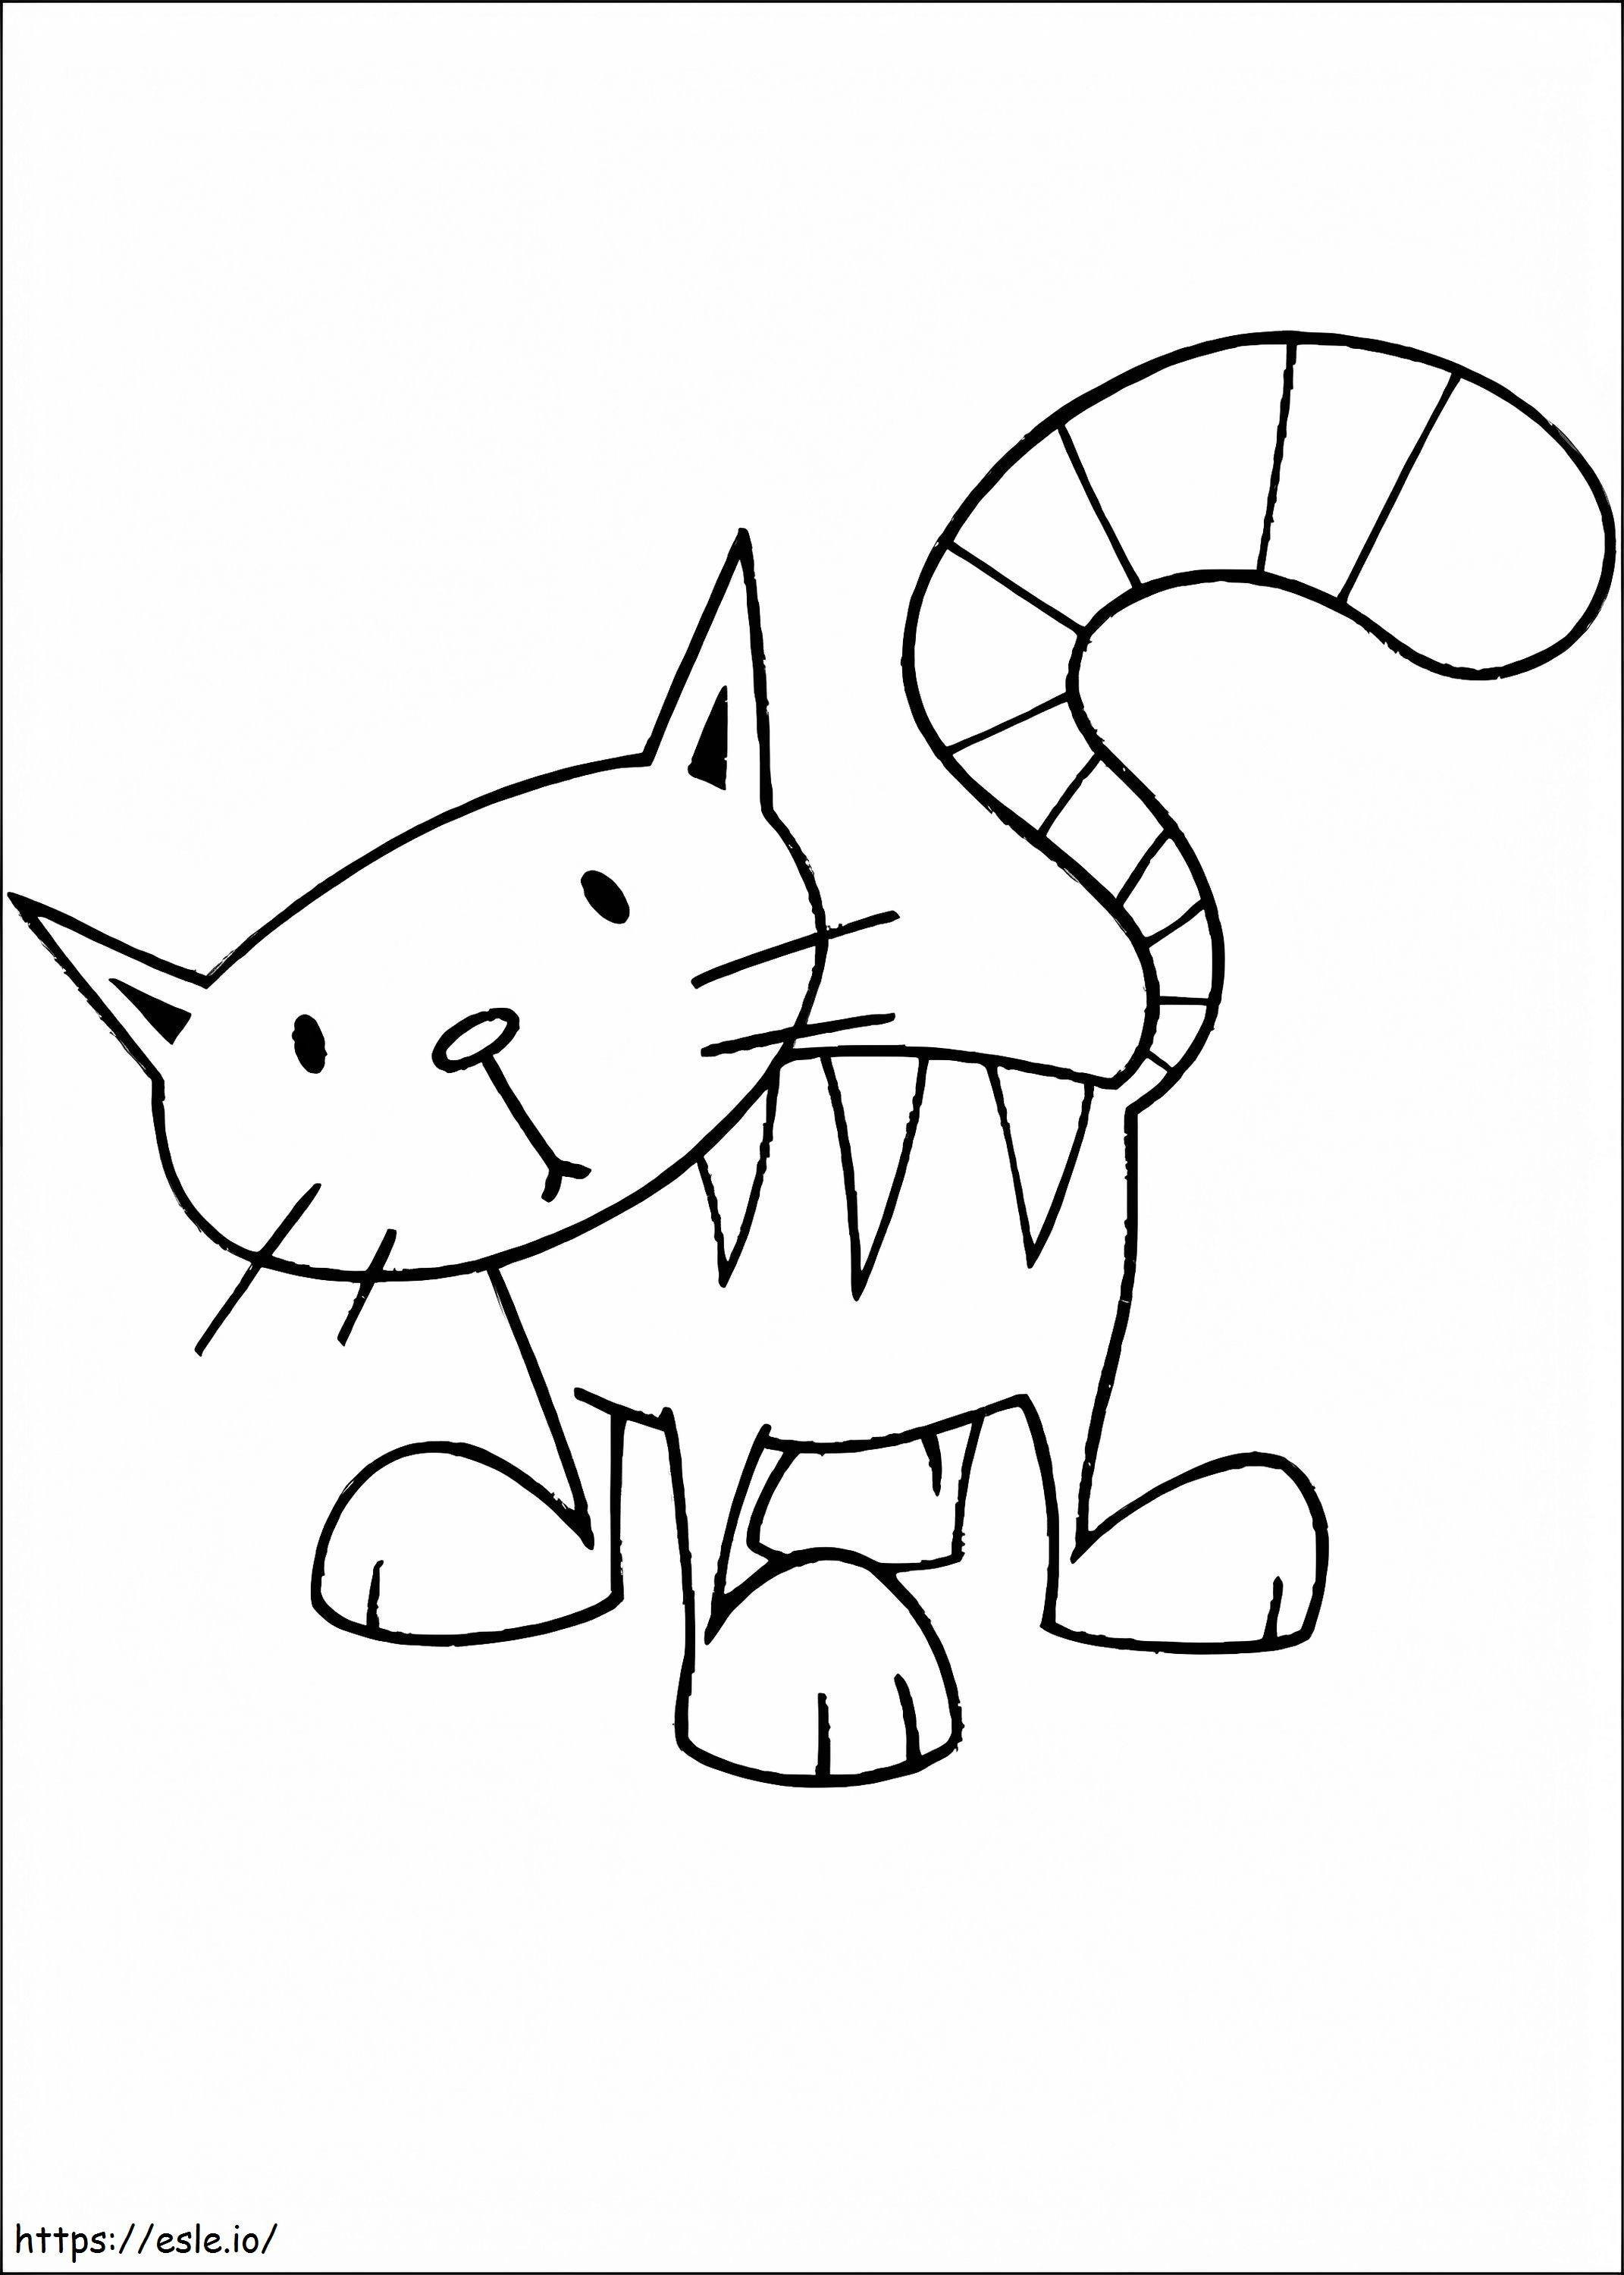 1534129873 Pilchard A4 coloring page